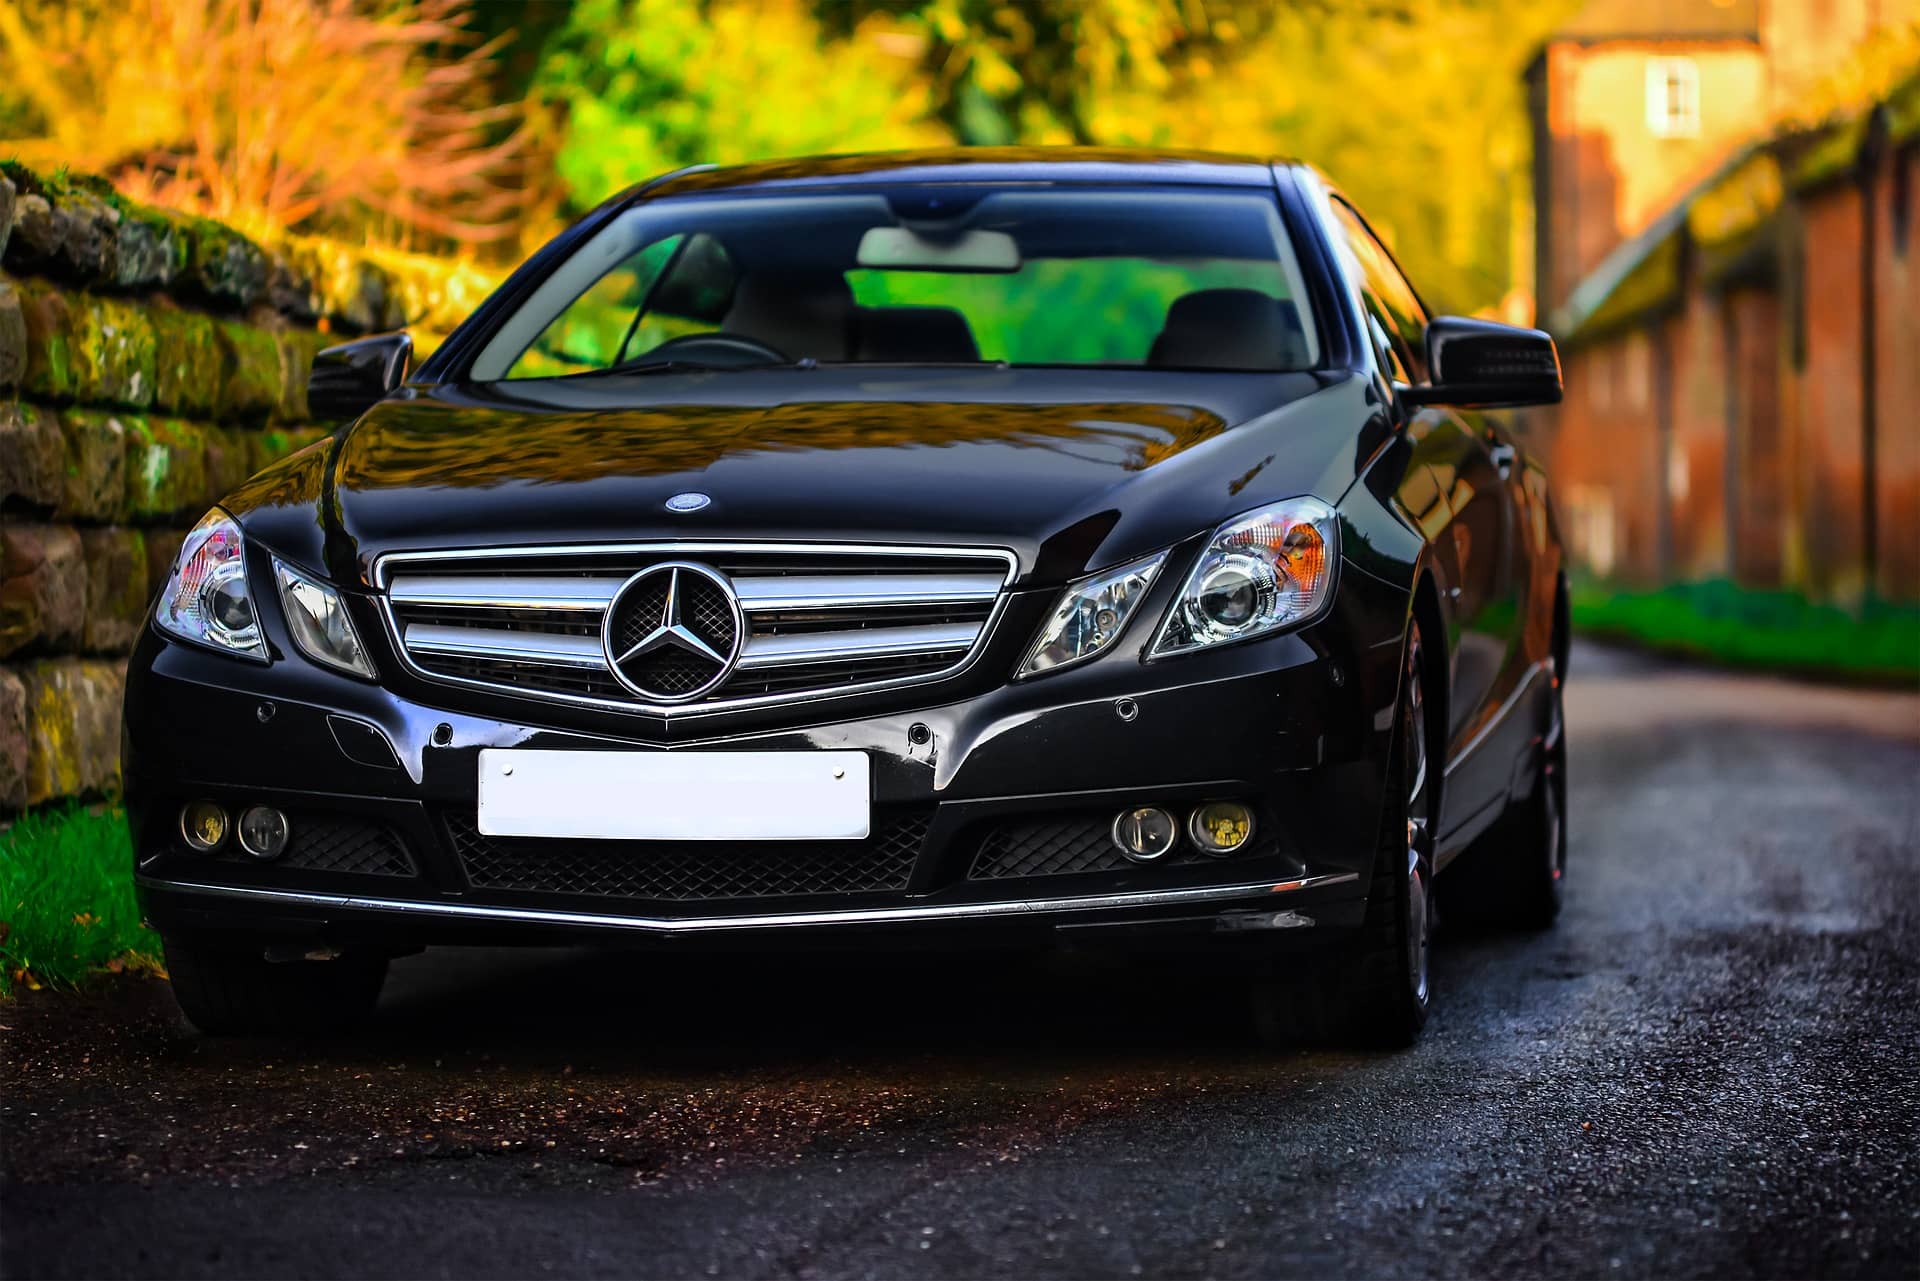 Mercedes e Class used for our 10 Best Vehicles for UK Taxi Drivers